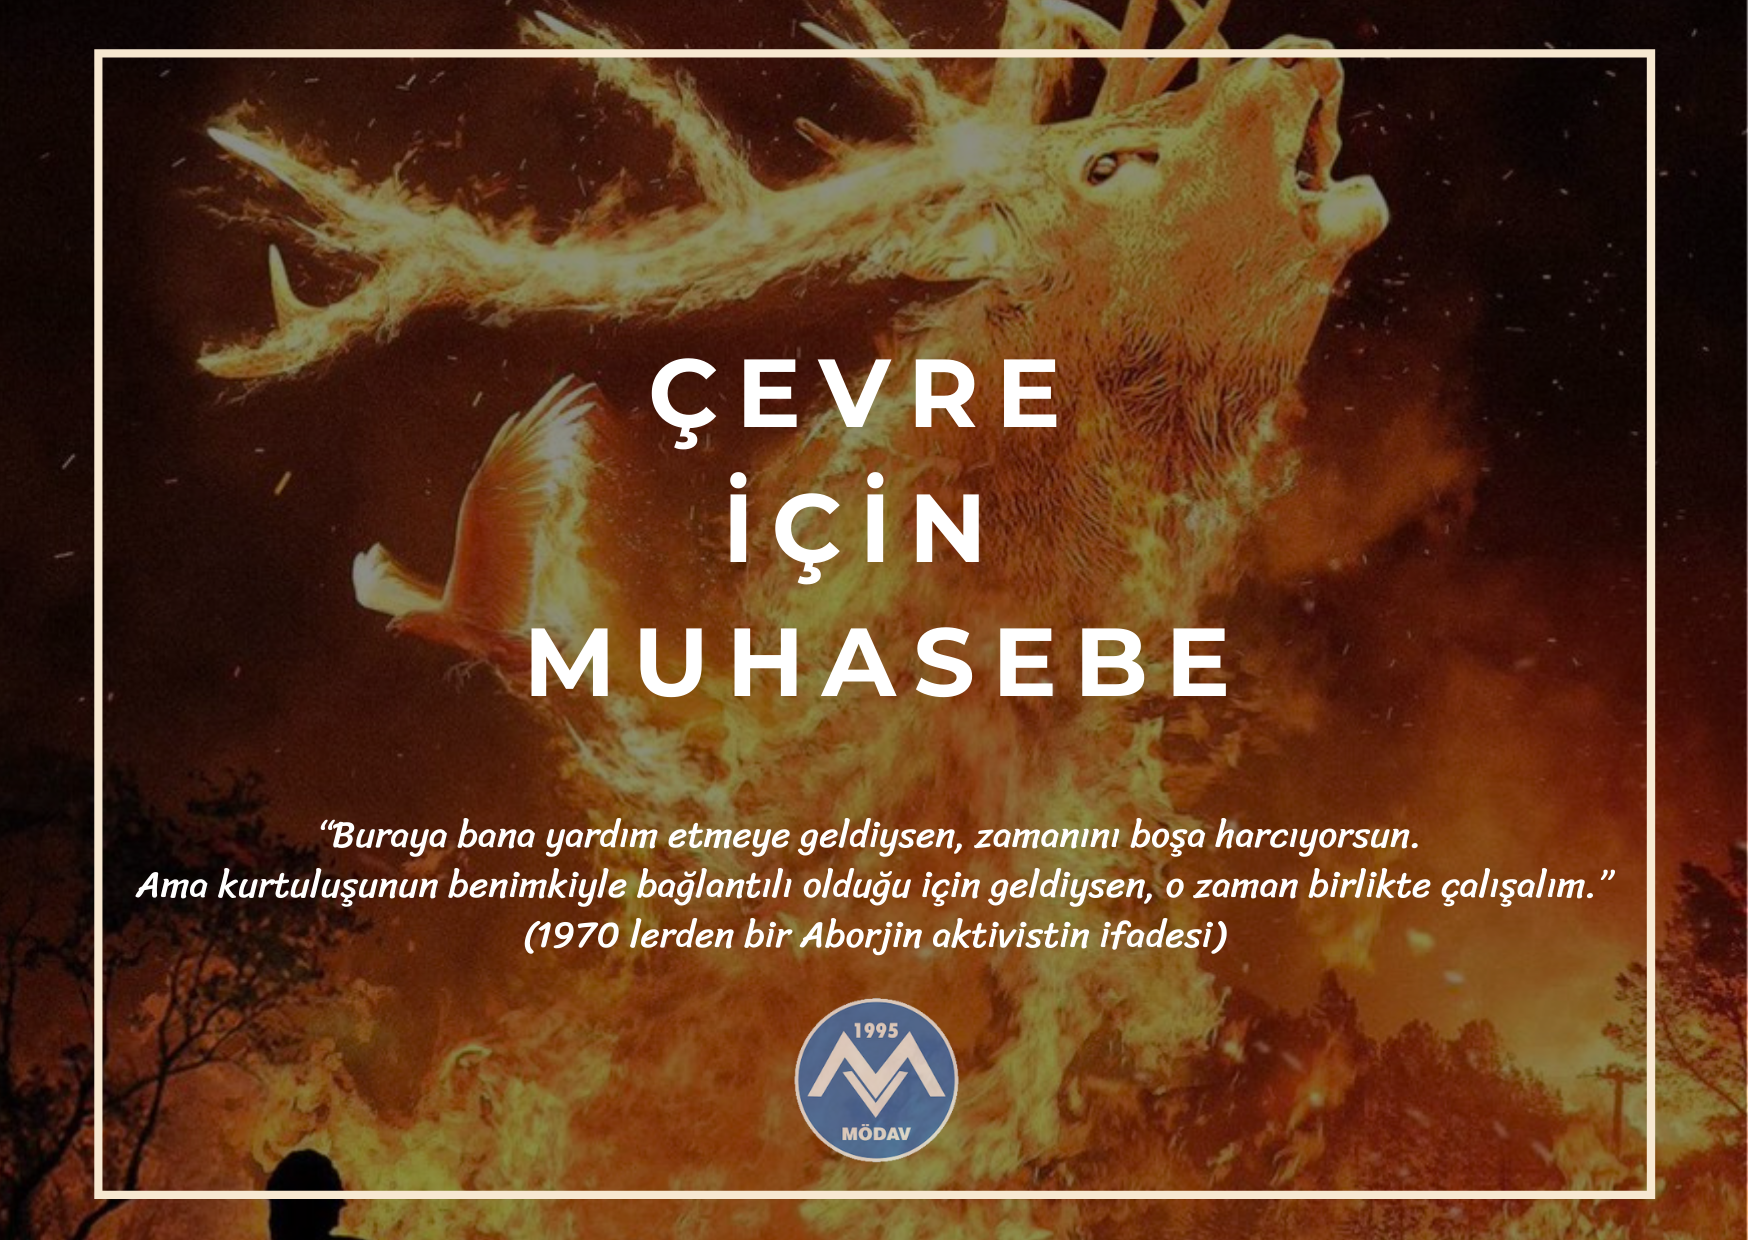 evre in Muhasebe